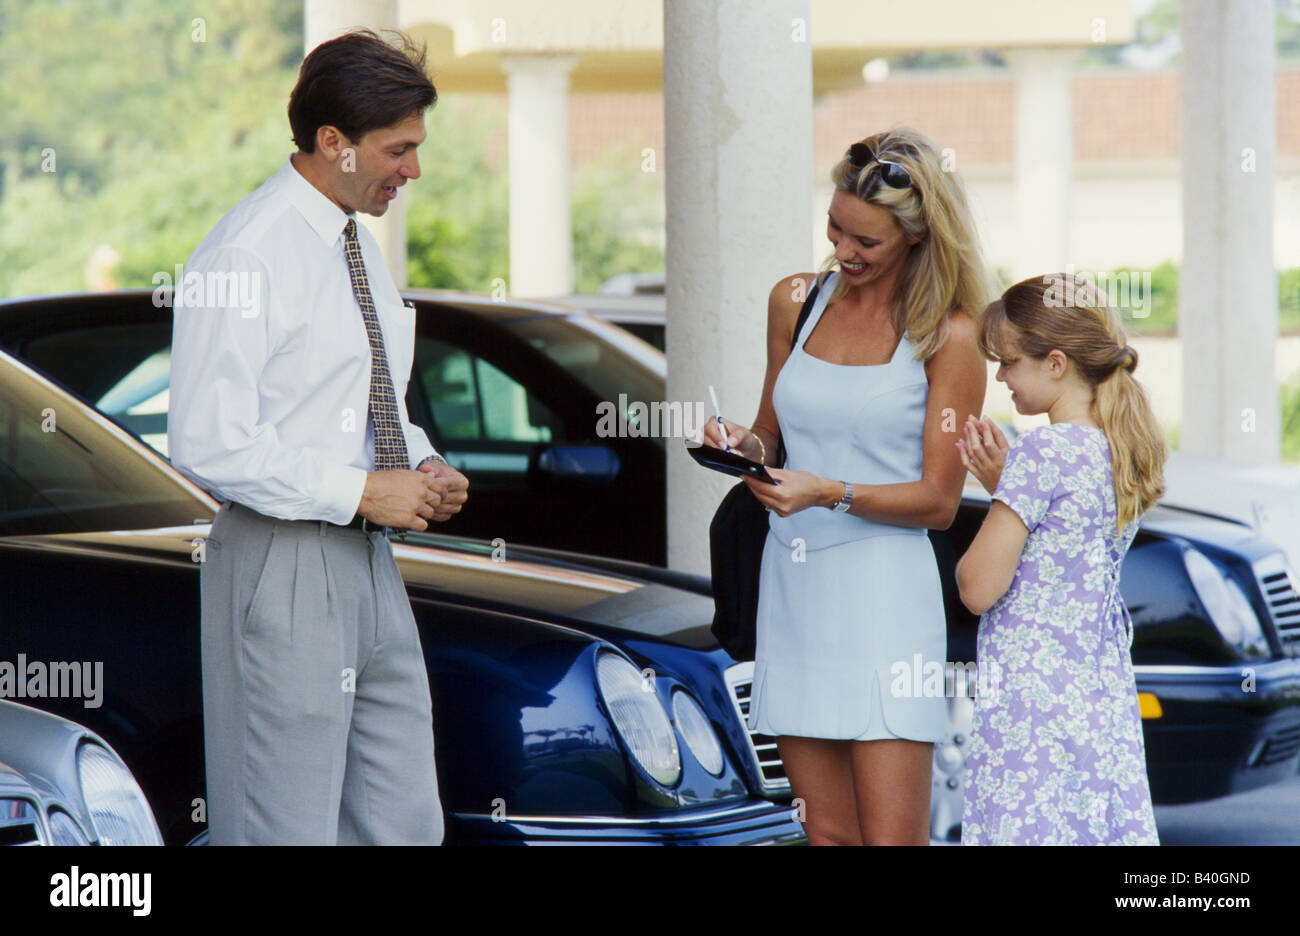 Young woman and child purchasing car from salesman, Miami Stock Photo